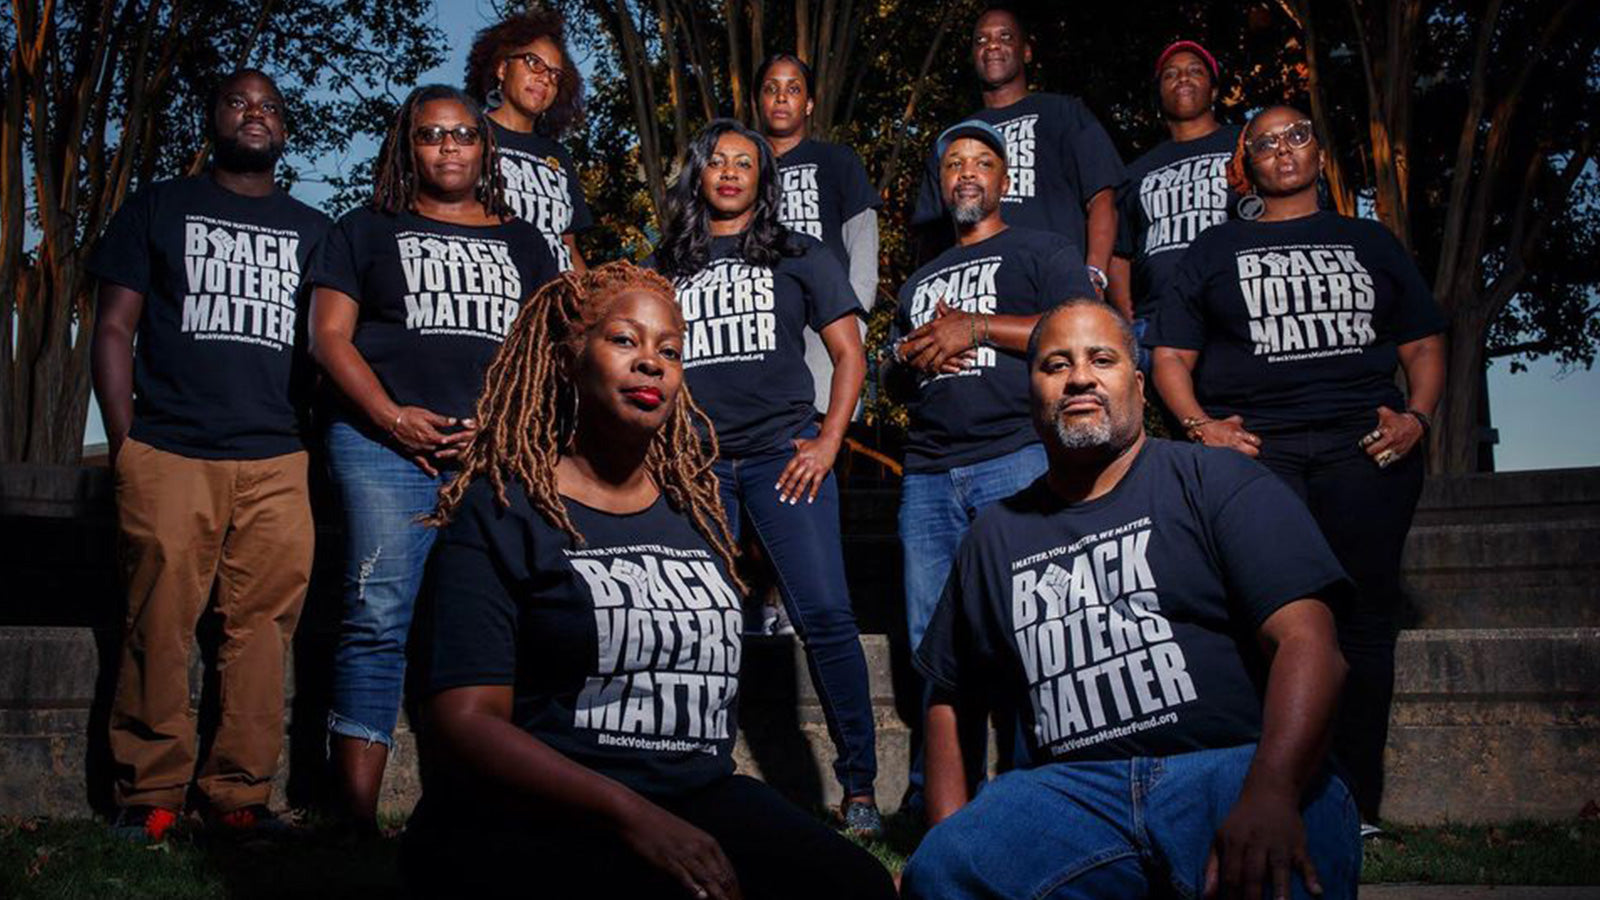 A group of people stand in a group wearing Black Voters Matter t-shirts